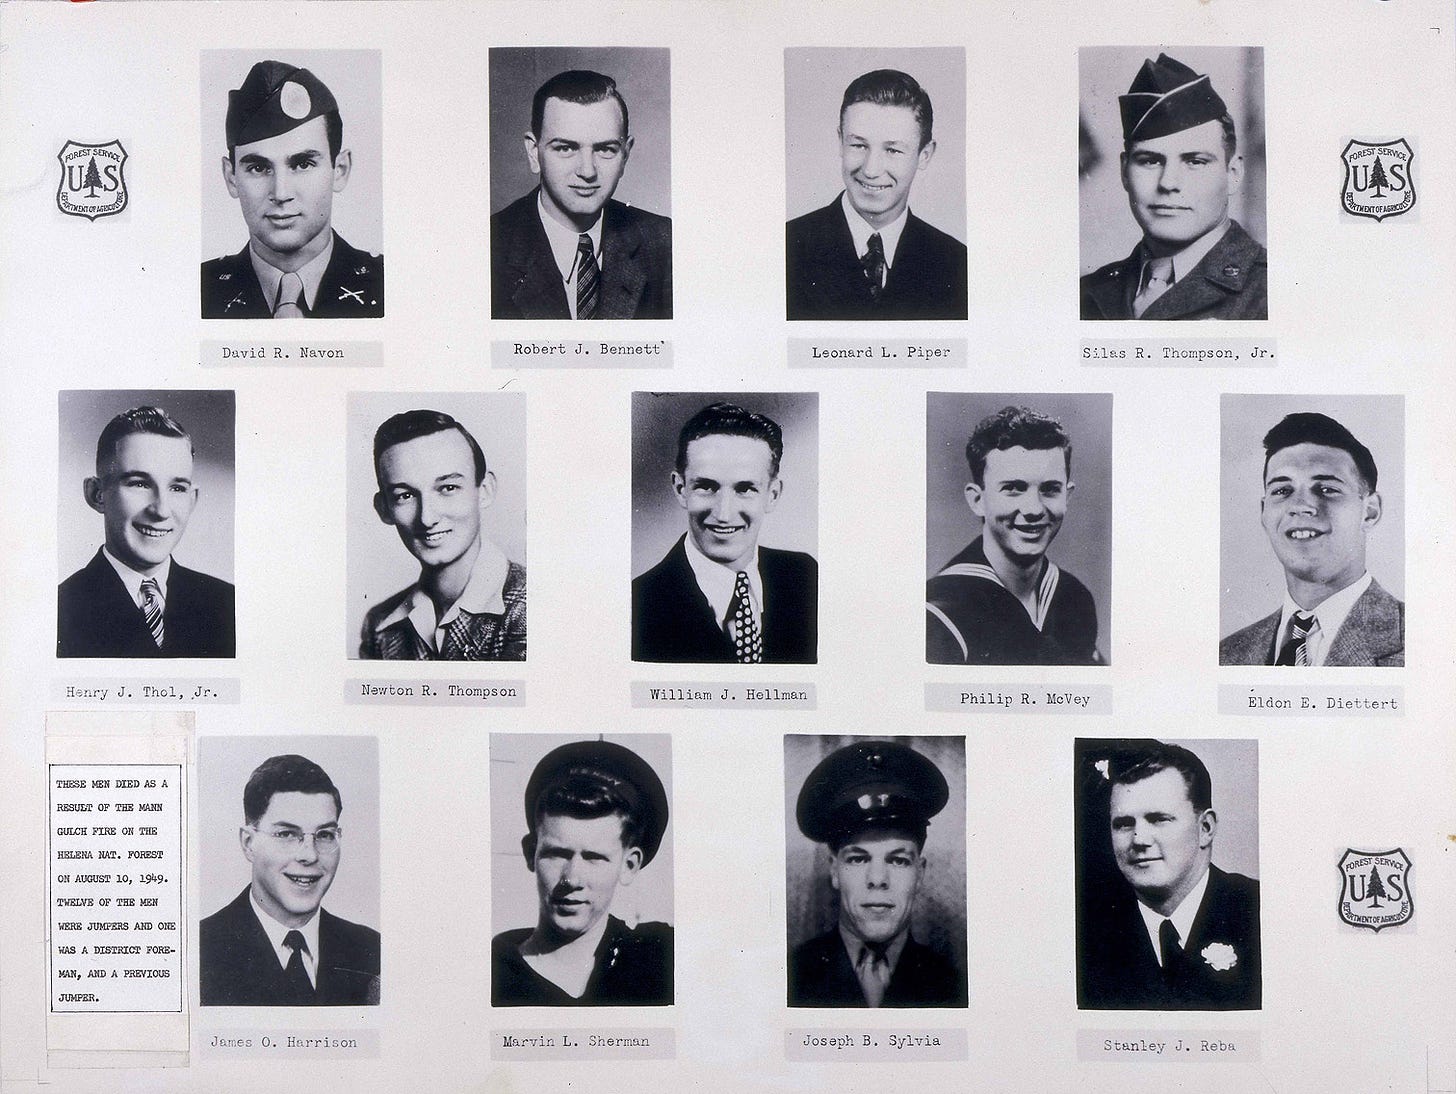 https://upload.wikimedia.org/wikipedia/commons/6/63/Mann_Gulch_Fire%2C_1949_US_Forest_Service_Smokejumpers_-_Memorial_photos%2C_13_victims.jpg